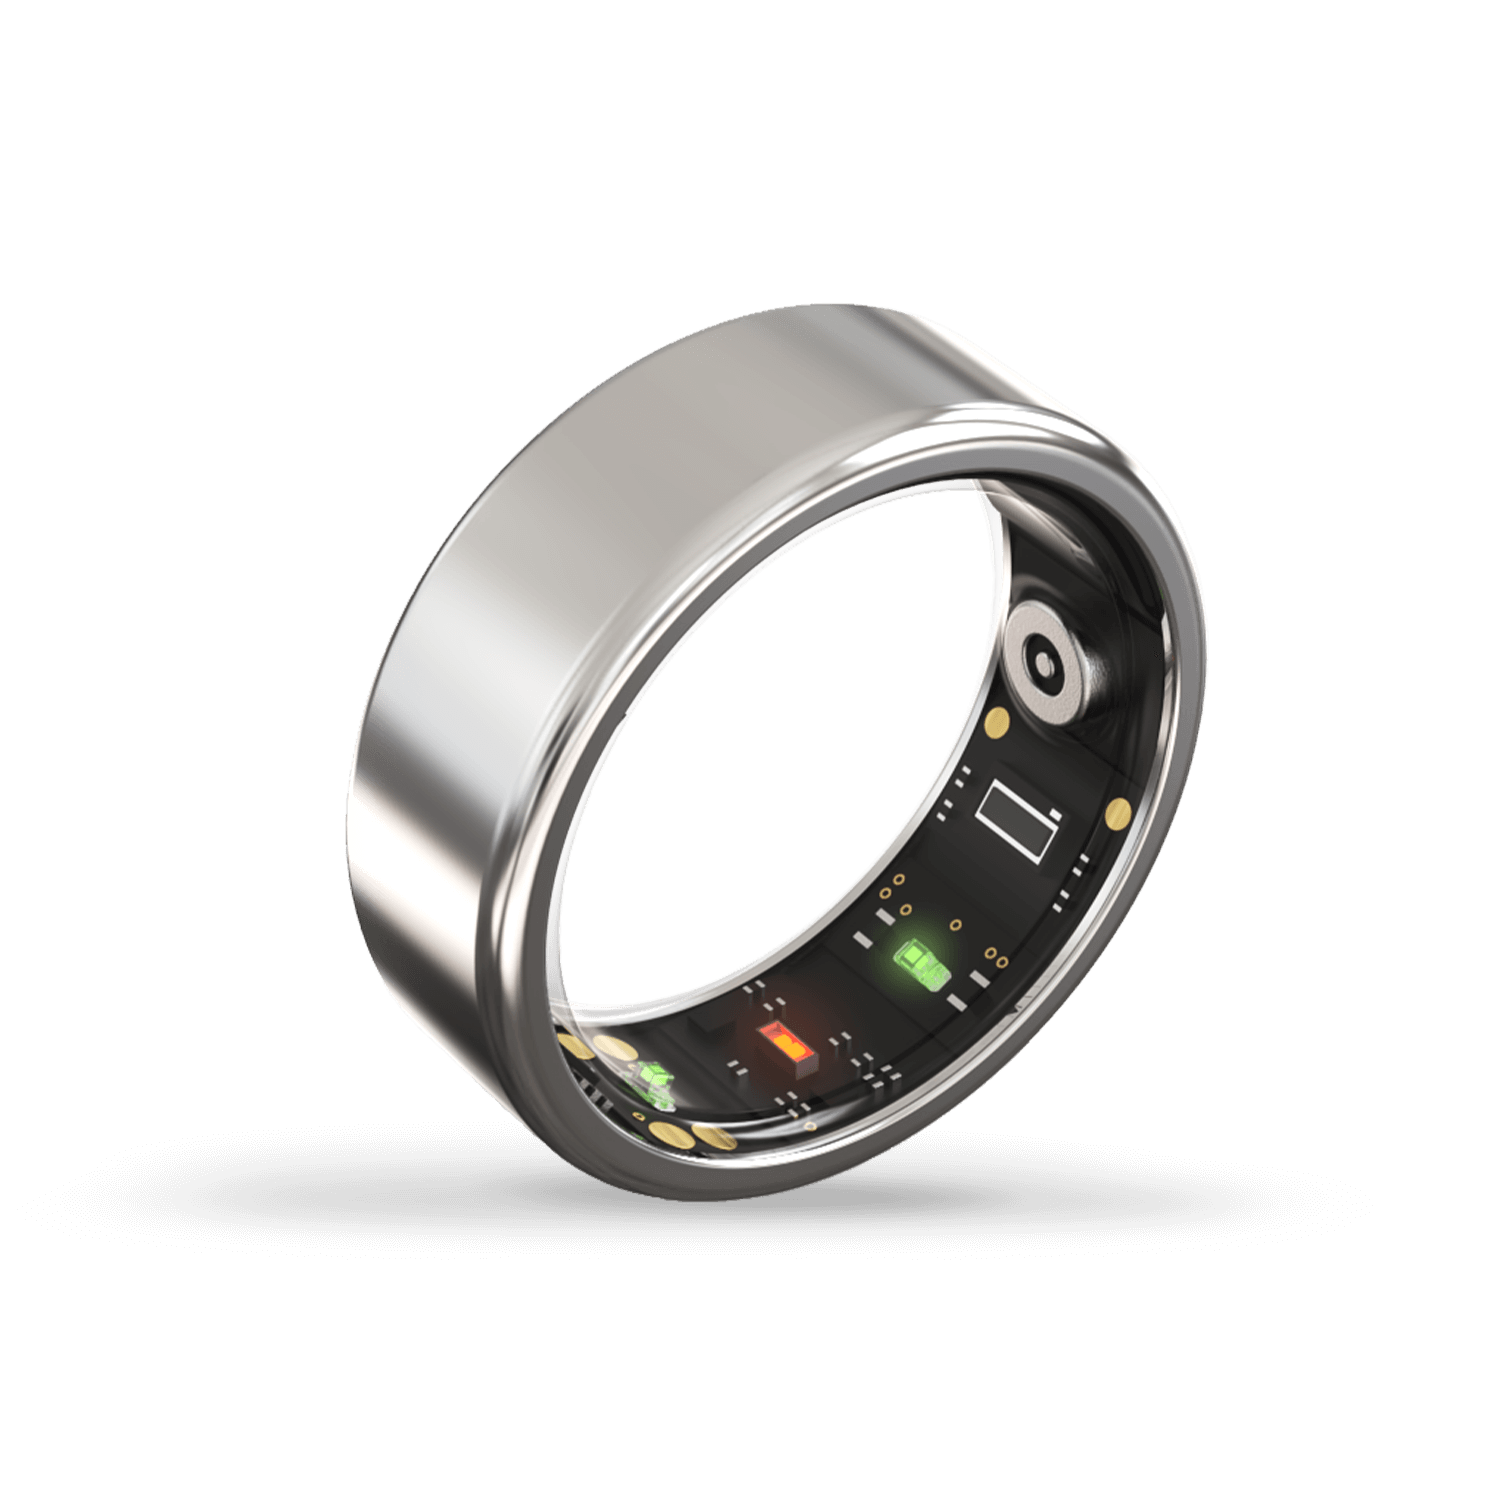 JAKCOM R5 Smart Ring New Product of Consumer electronics smart wearable  device Watch 200003487